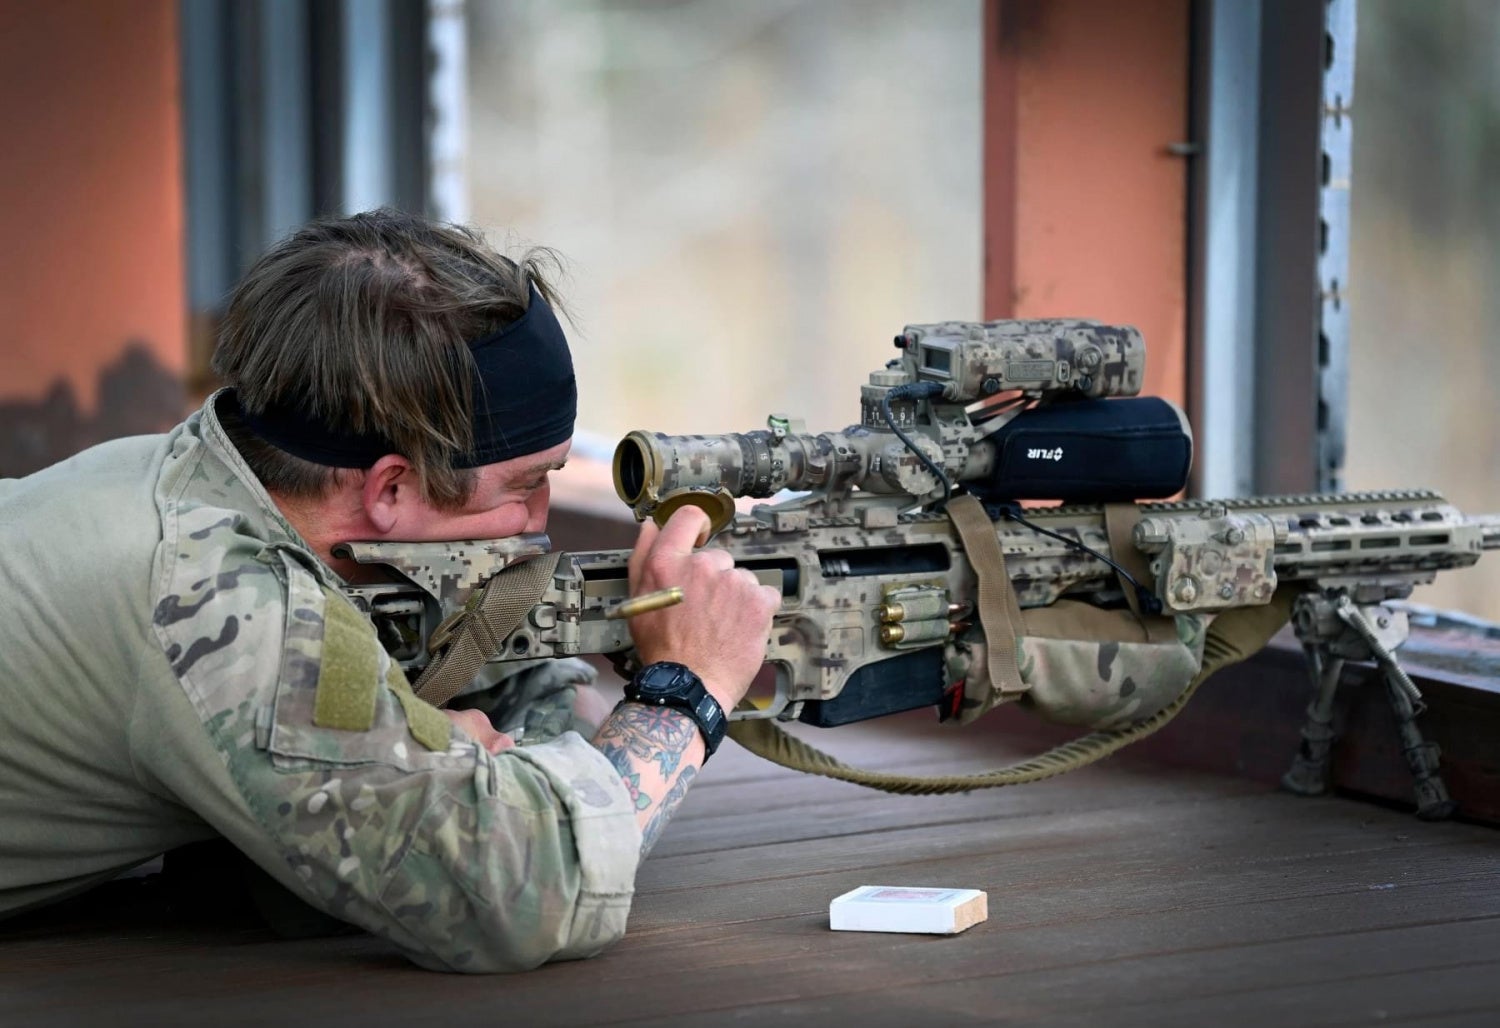 File:2022 USASOC International Sniper Competition Image 1 of 16